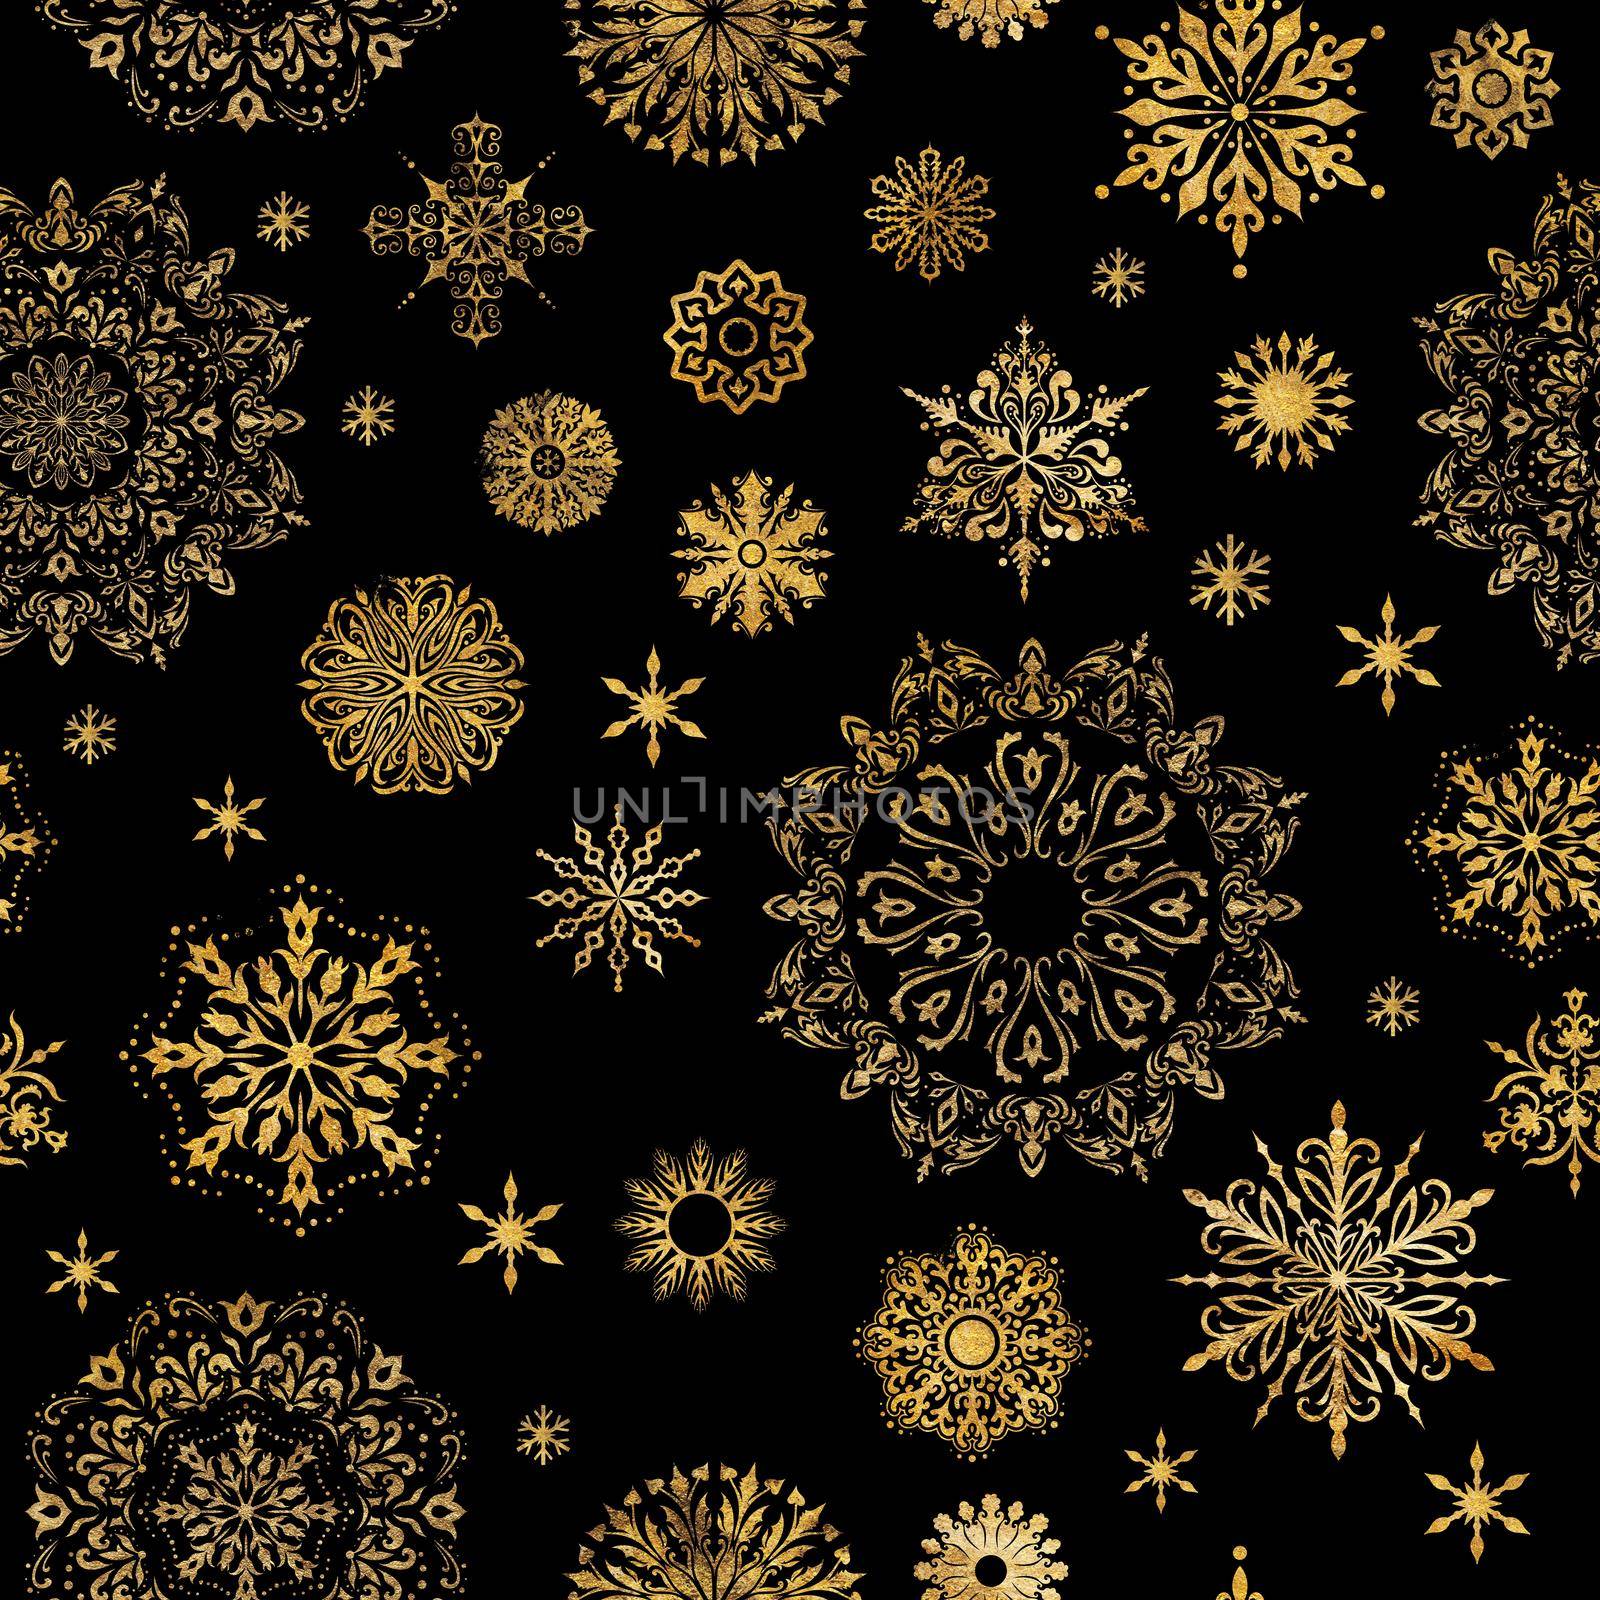 Christmas Festive Background With Gold Glitter Snowflakes by kisika